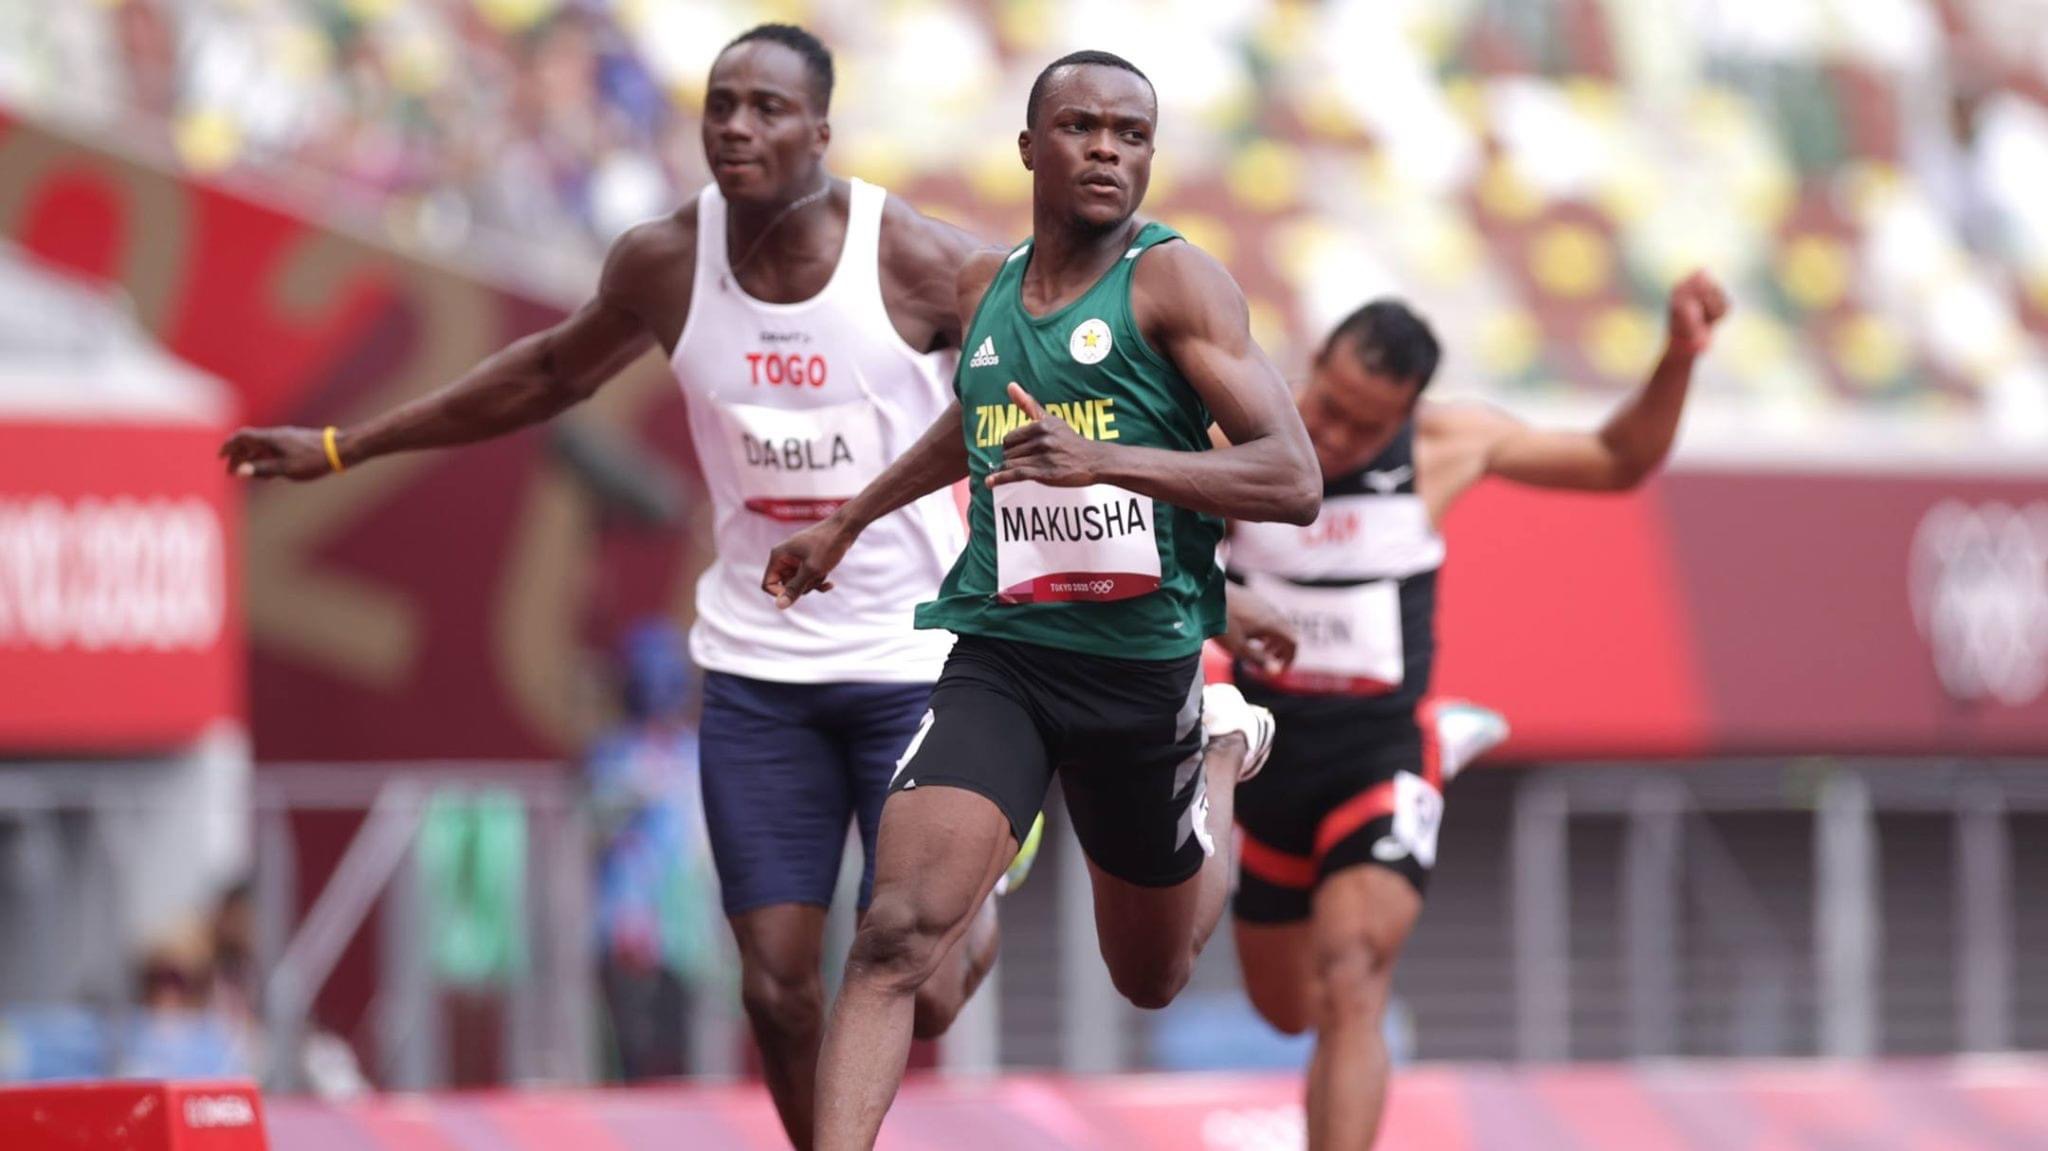 Ngoni Makusha (left) going through the 100m race at Tokyo Olympics 2020 in Japan (Picture via: Getty Images)